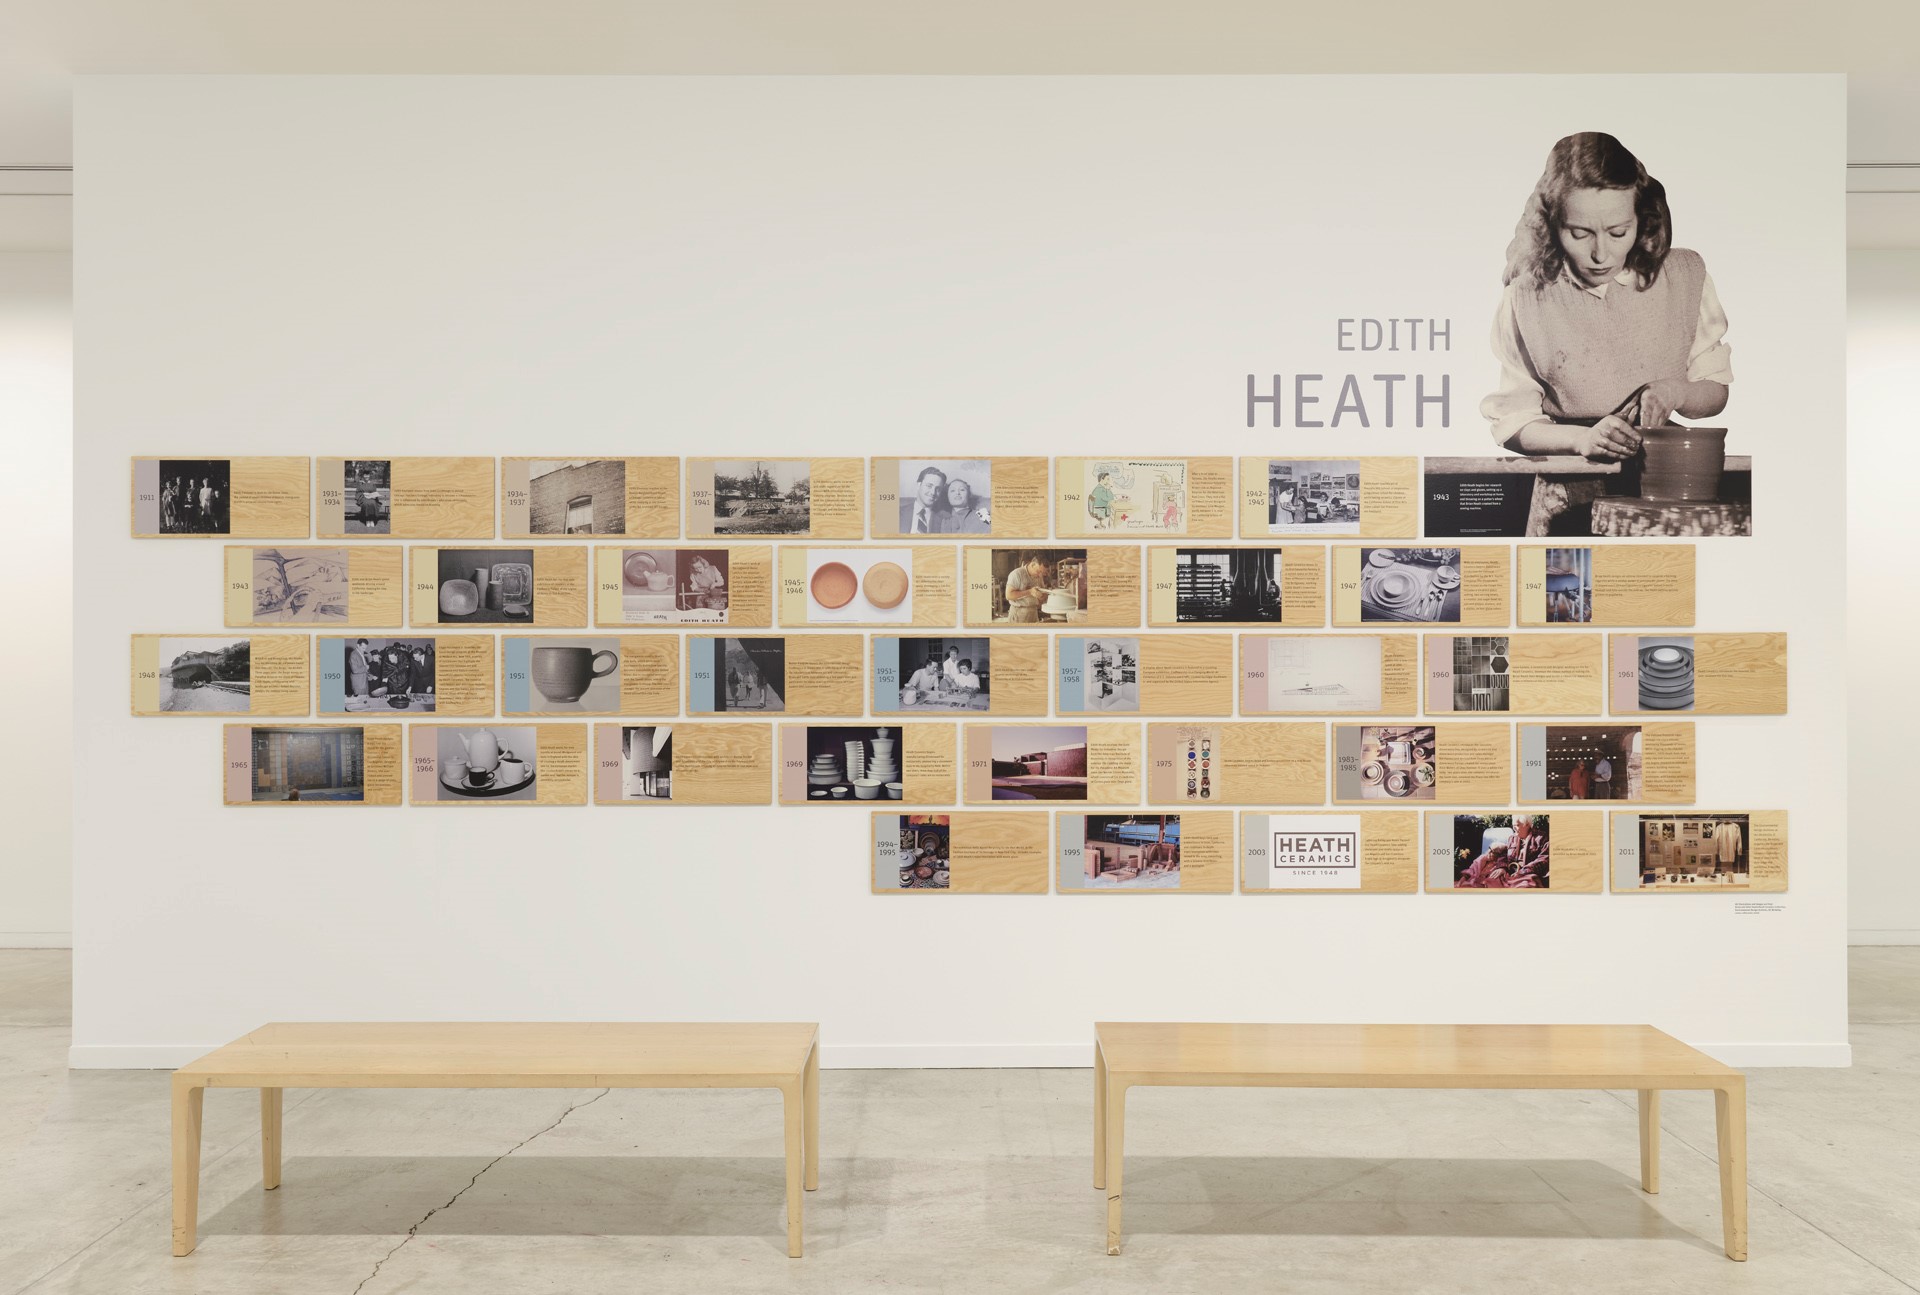 Photograph of thrity eight small rectangles with different images and text, and photo of Edith Heath on her pottery wheel on top of them.